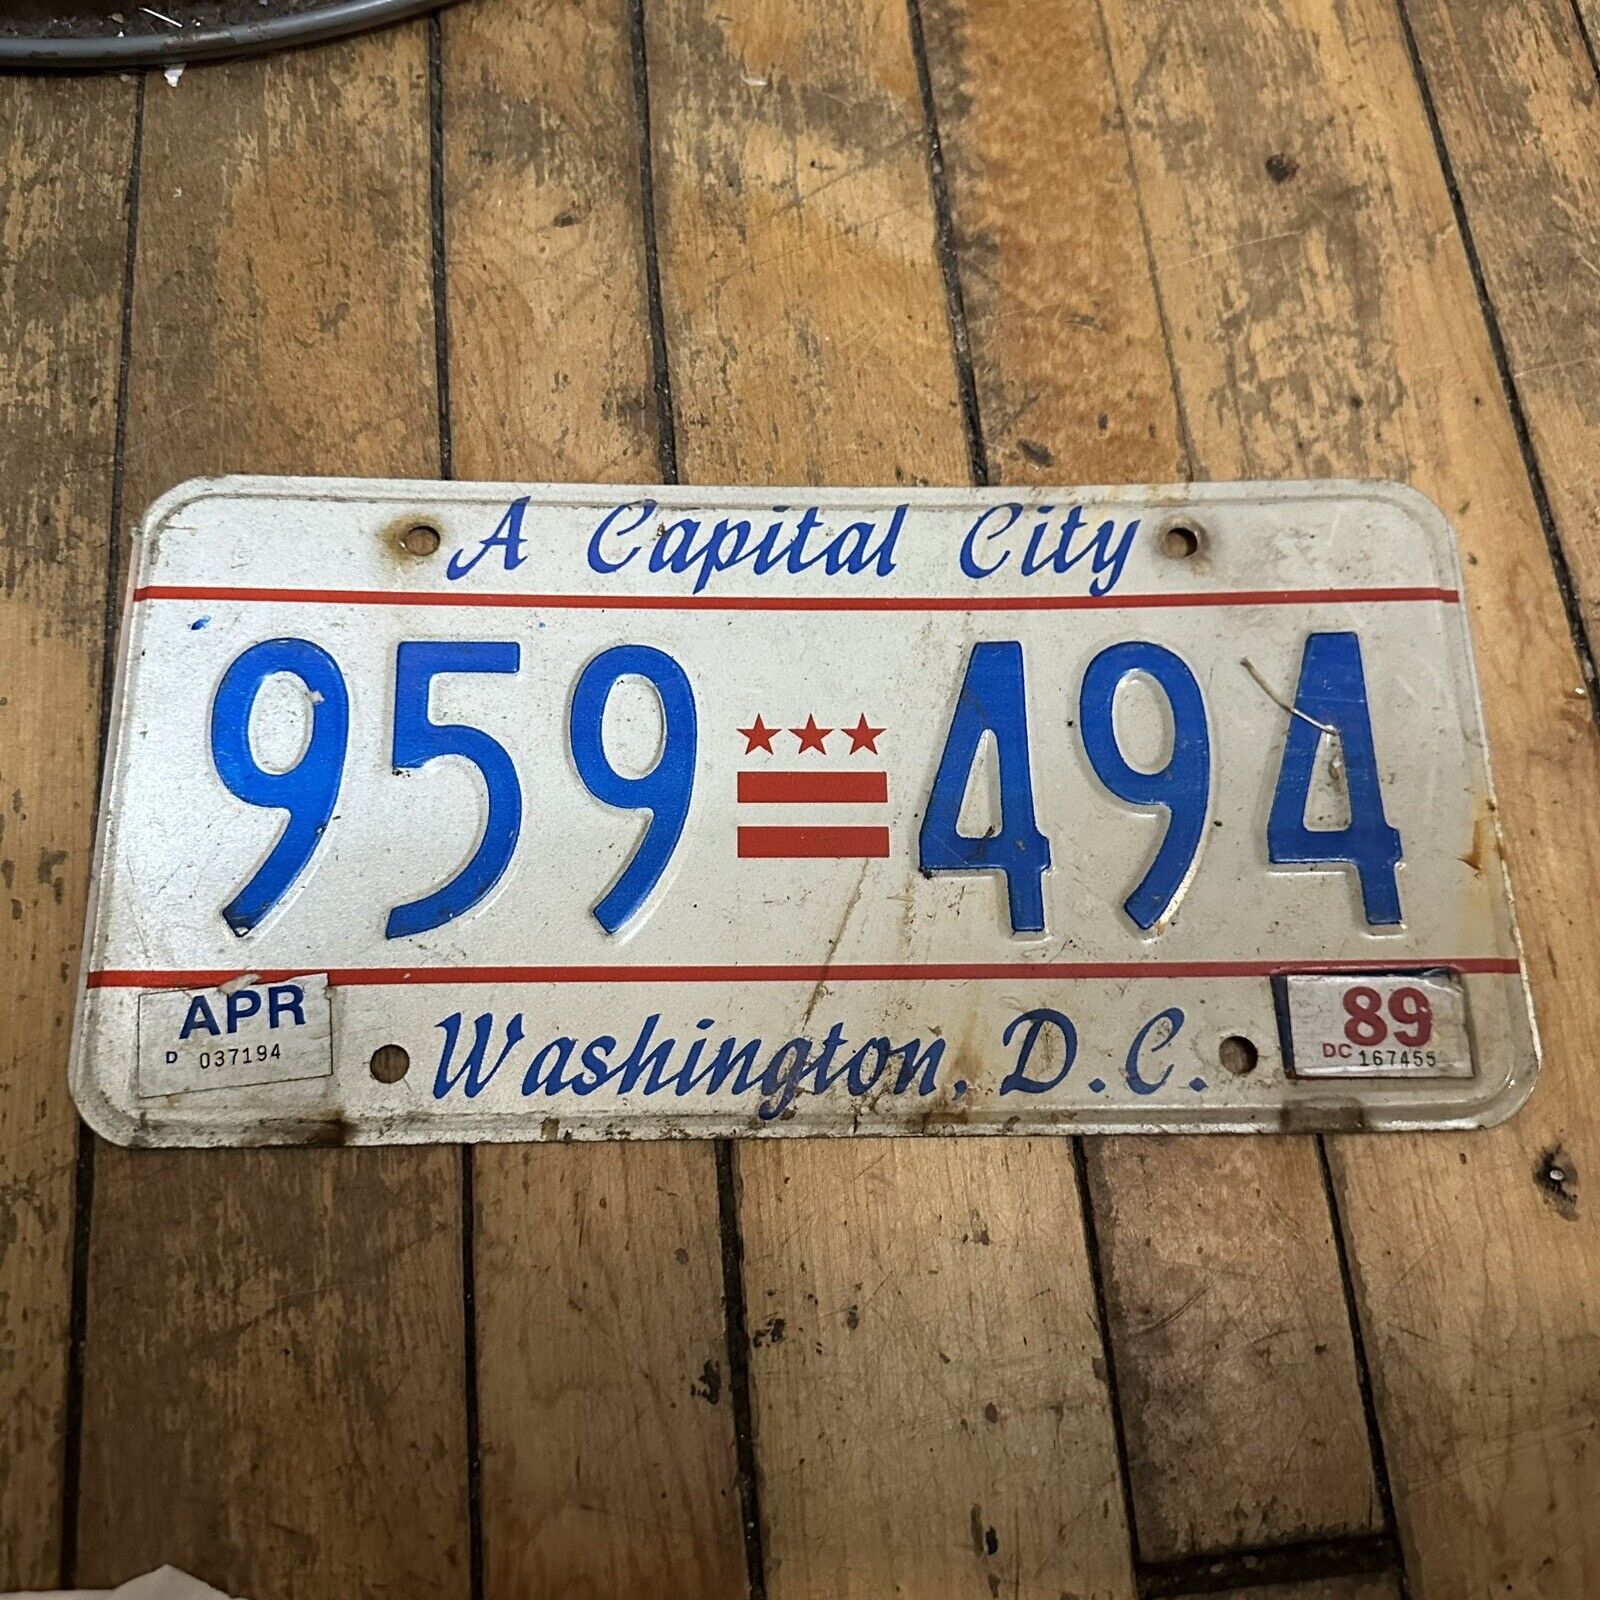 1989 Washington DC District License Plate Low Number Capital City 959 494